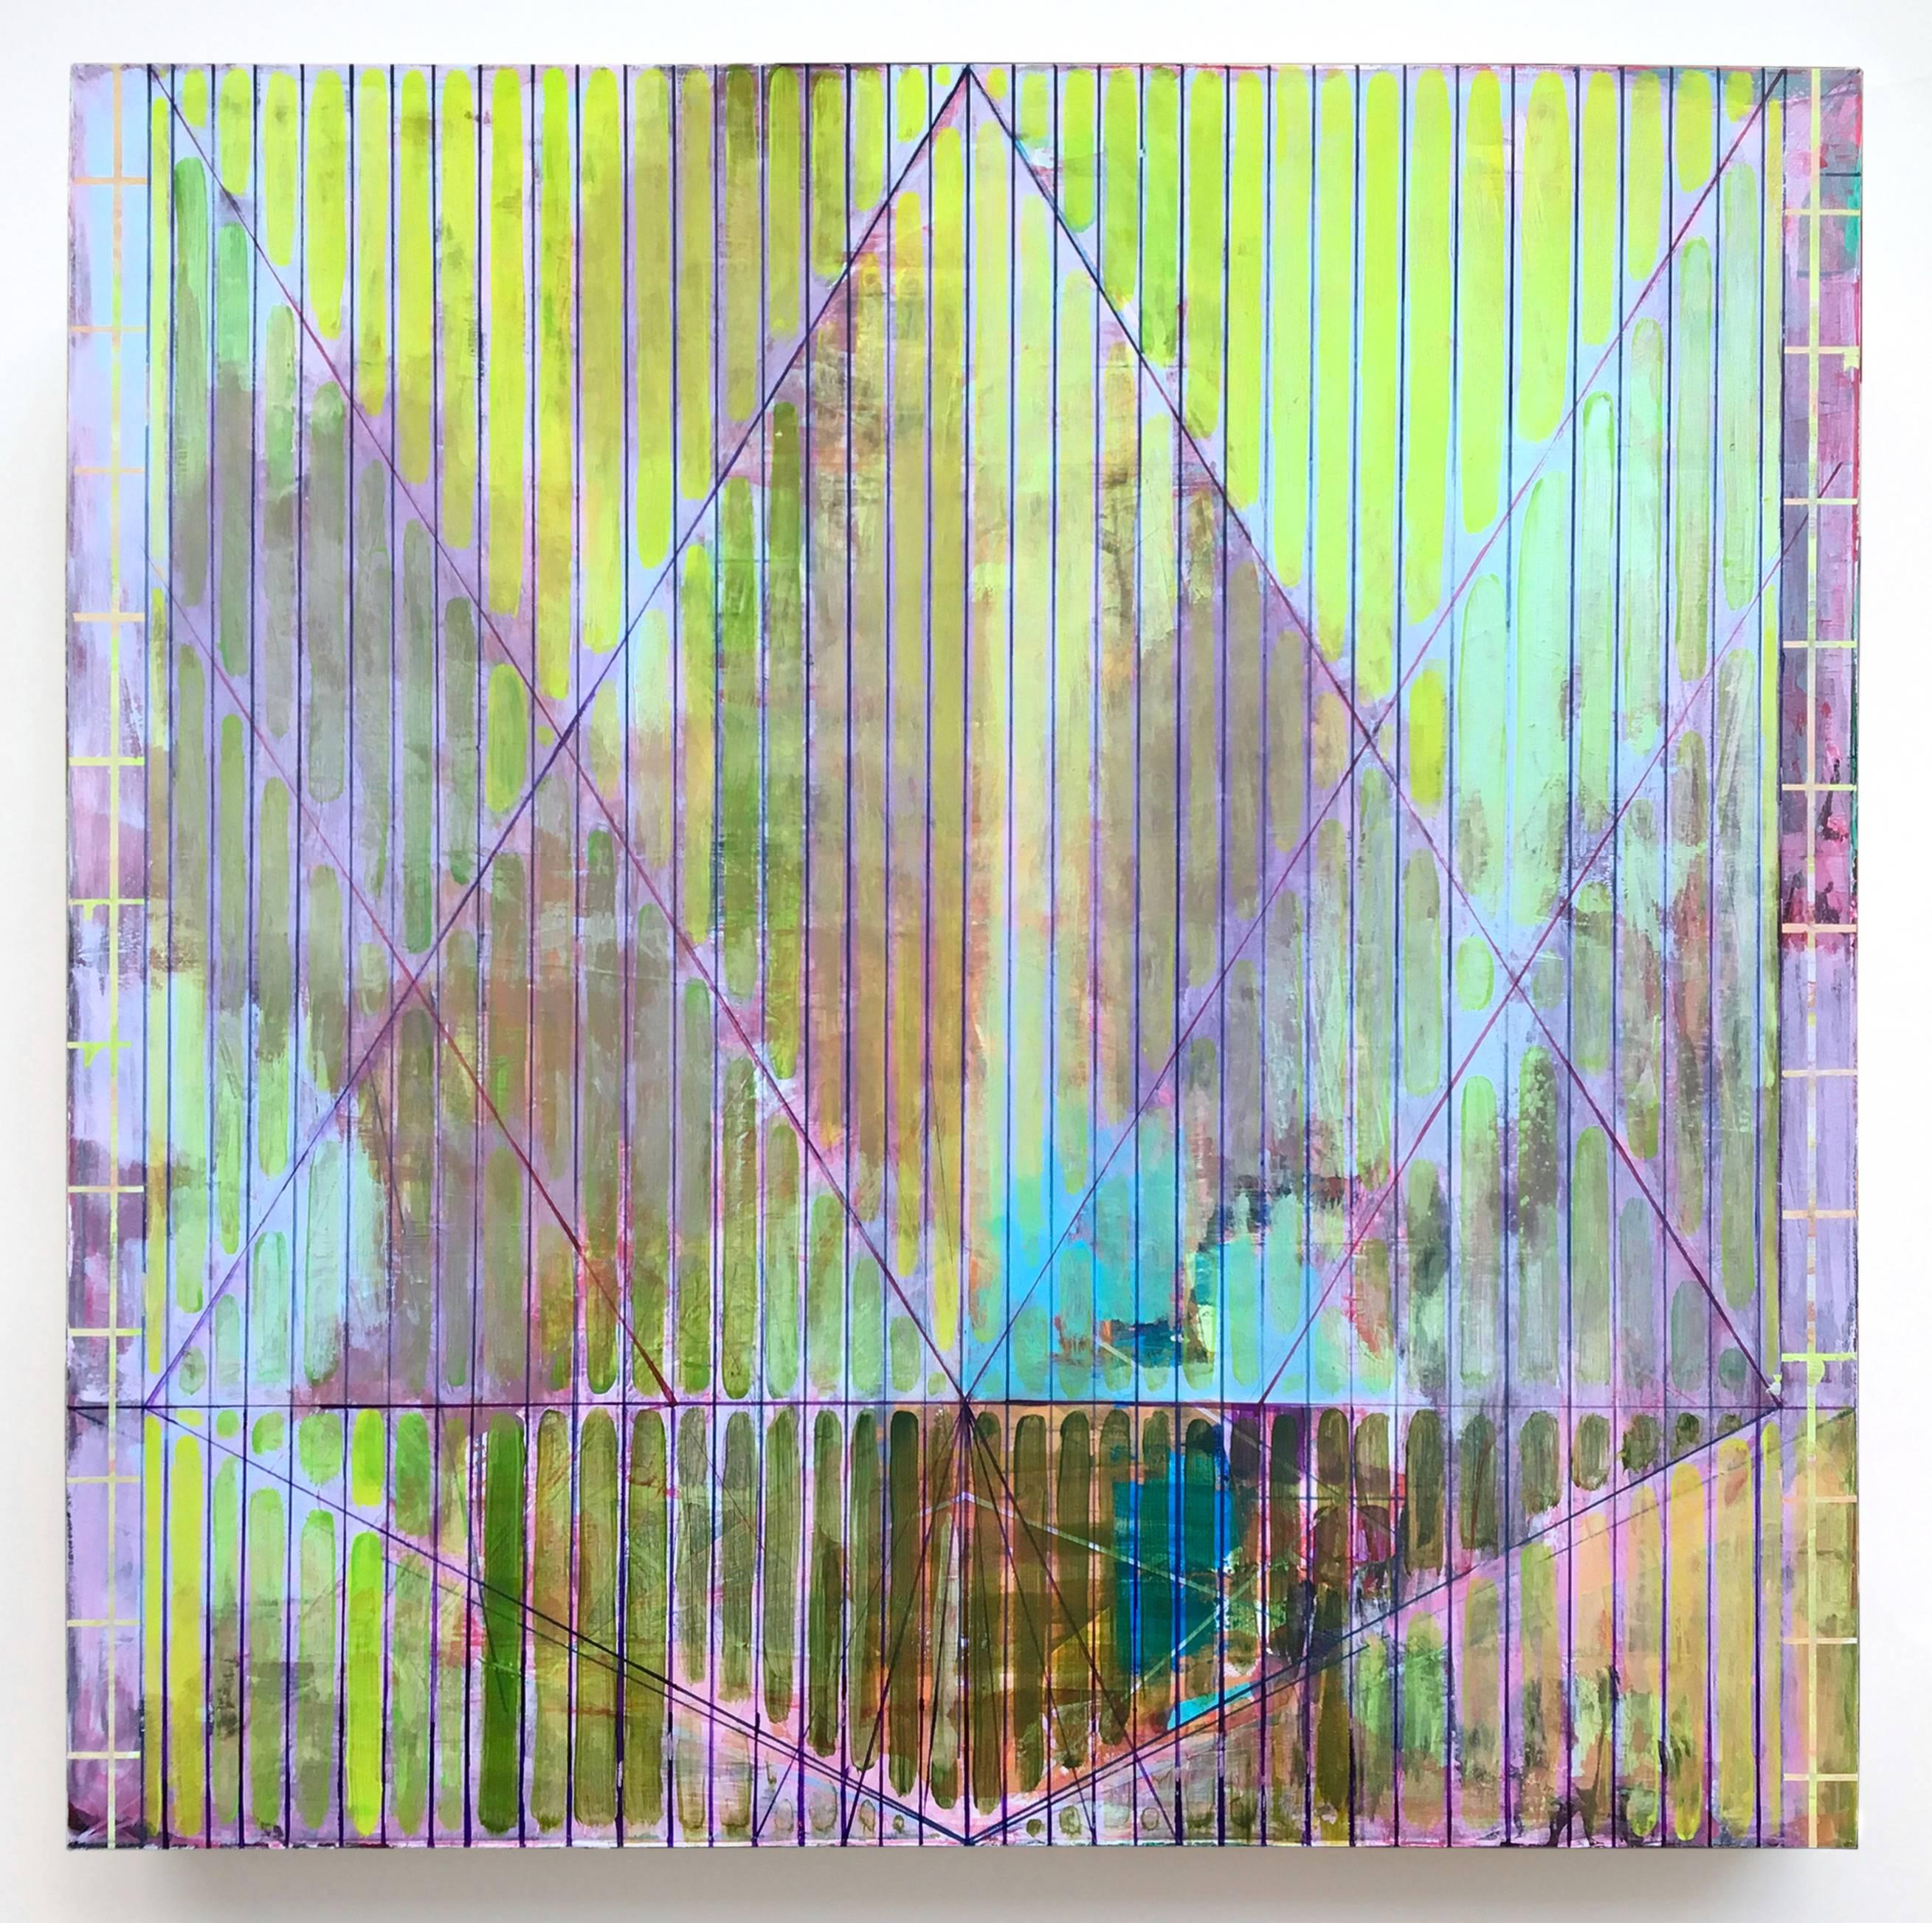 Joe Lloyd, Green Pattern, 2017, acrylic on canvas, abstract painting, 50x50 inches.
Predominately yellow, pink, violet and blue, the translucent color layers highlight the geometry central to this paintings structural foundation.  

Joe Lloyd's